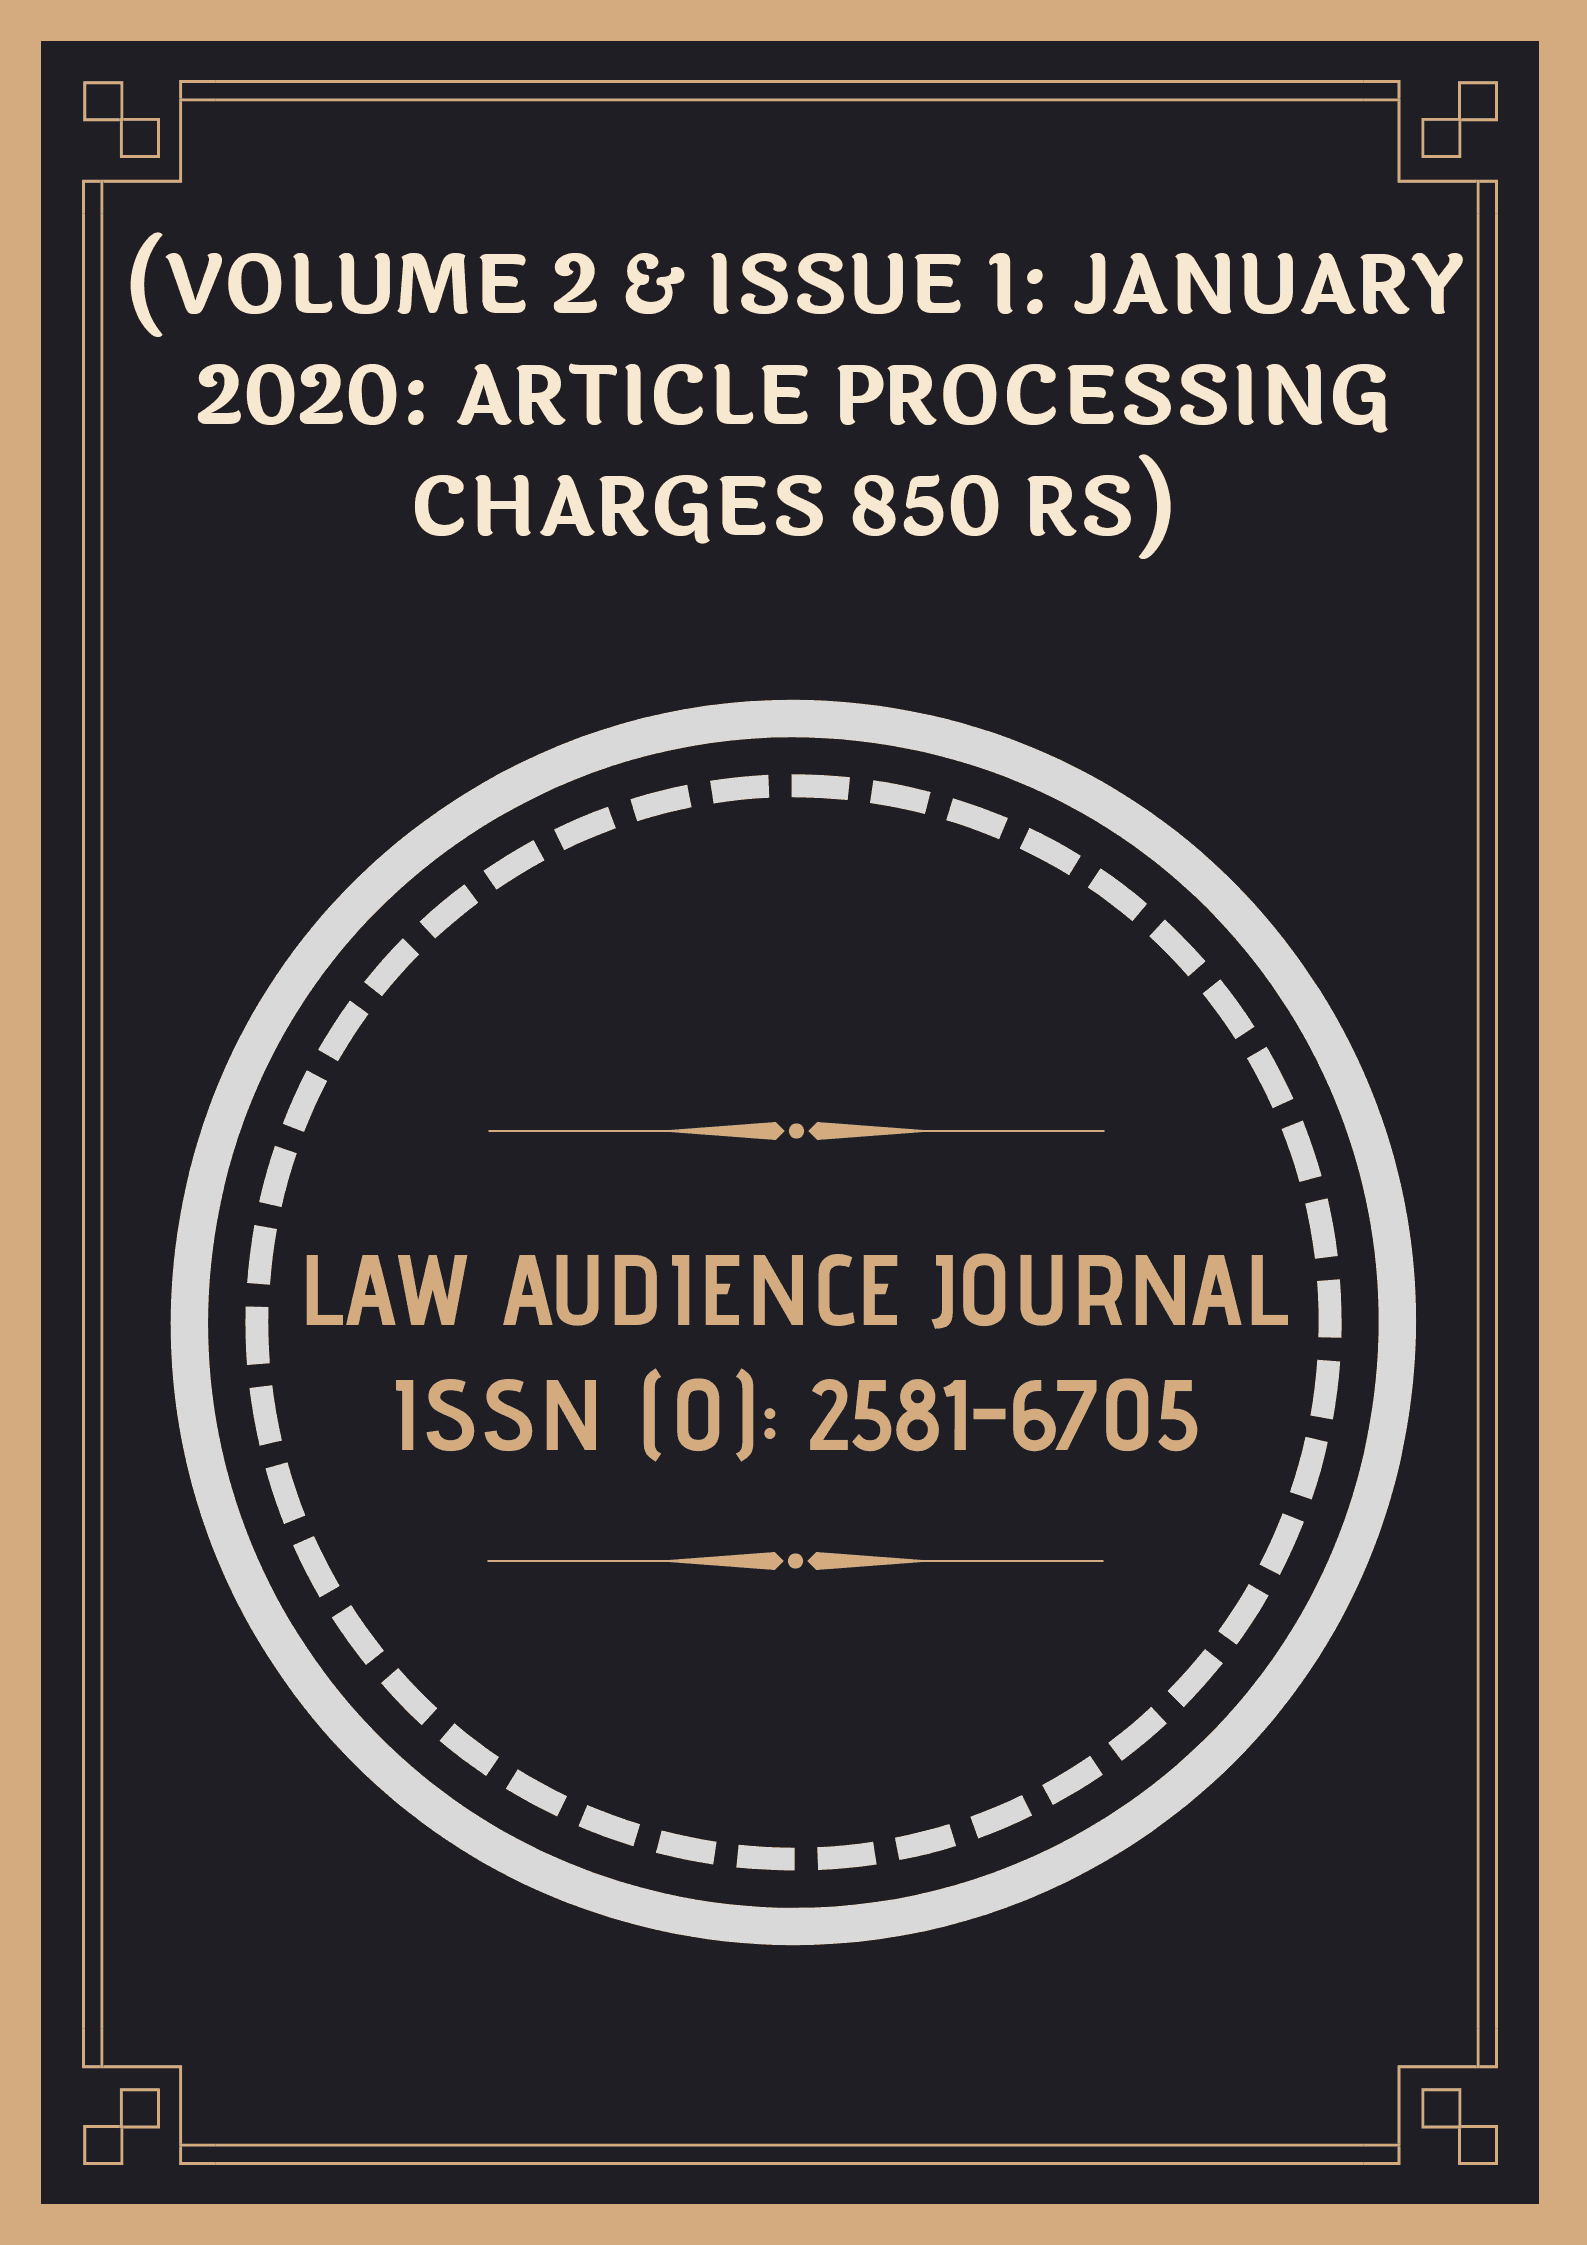 You are currently viewing CALL FOR PAPERS: LAW AUDIENCE JOURNAL: VOLUME 2 & ISSUE 1 JANUARY 2020: ARTICLE PROCESSING CHARGES 850 RS: